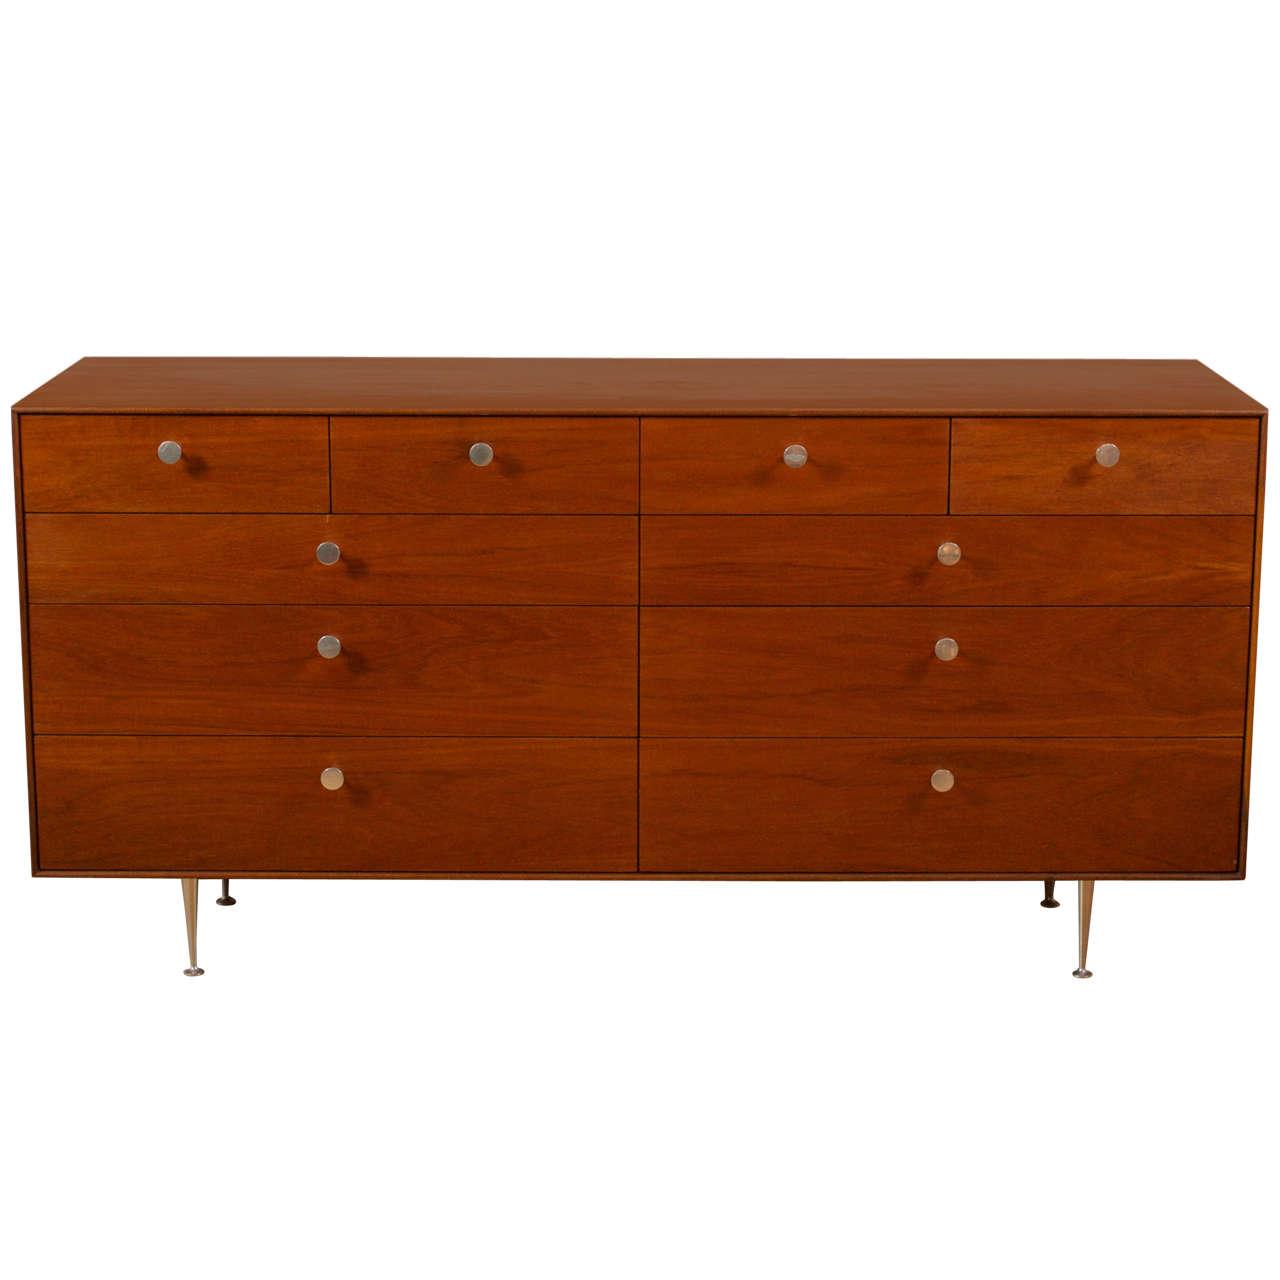 George Nelson Thin Edge Chest of Drawers